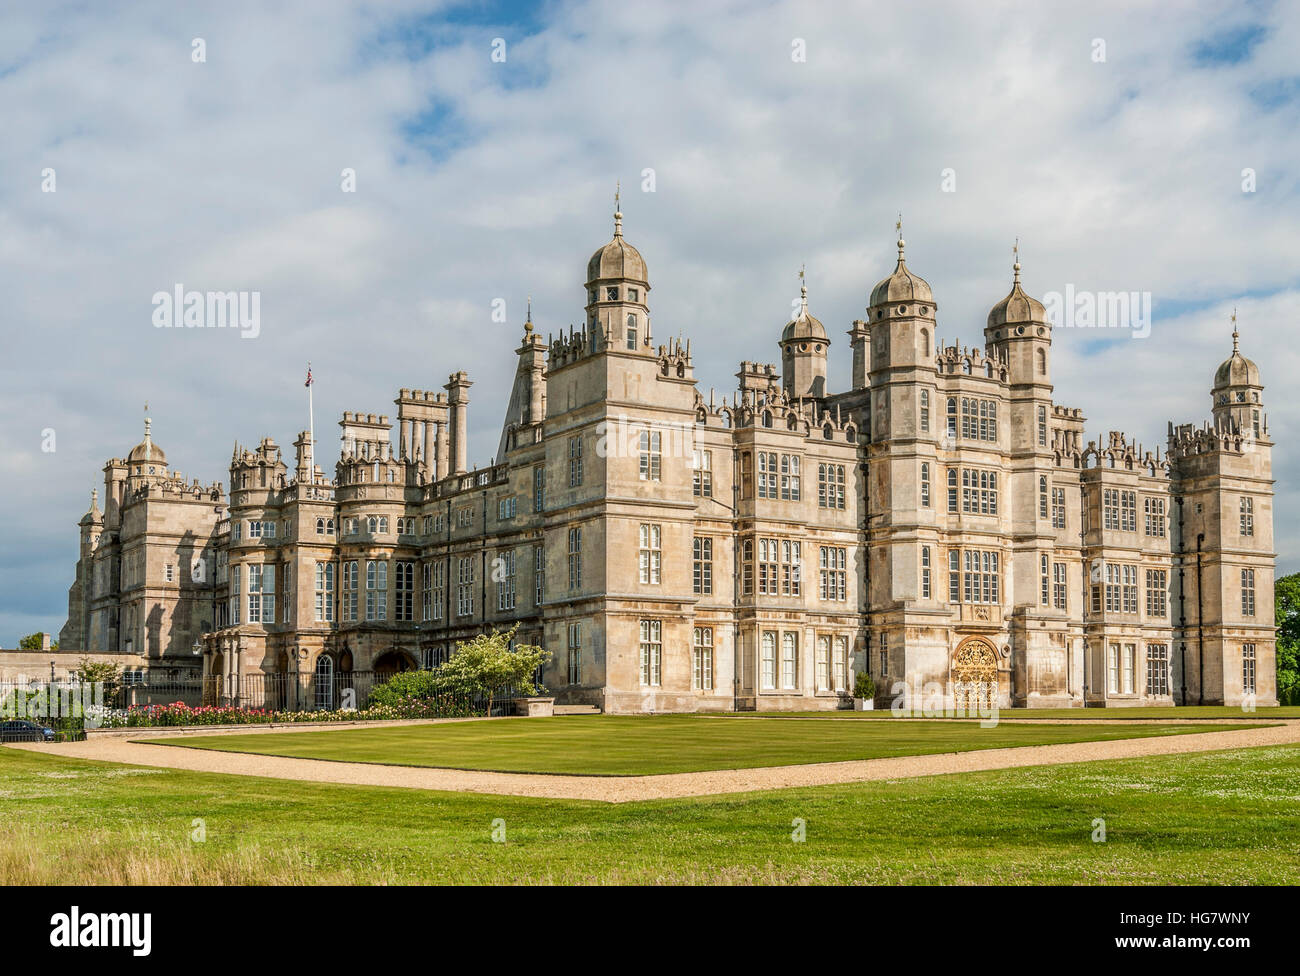 Burghley House, a grand 16th-century English country house near the town of Stamford in Lincolnshire, England Stock Photo